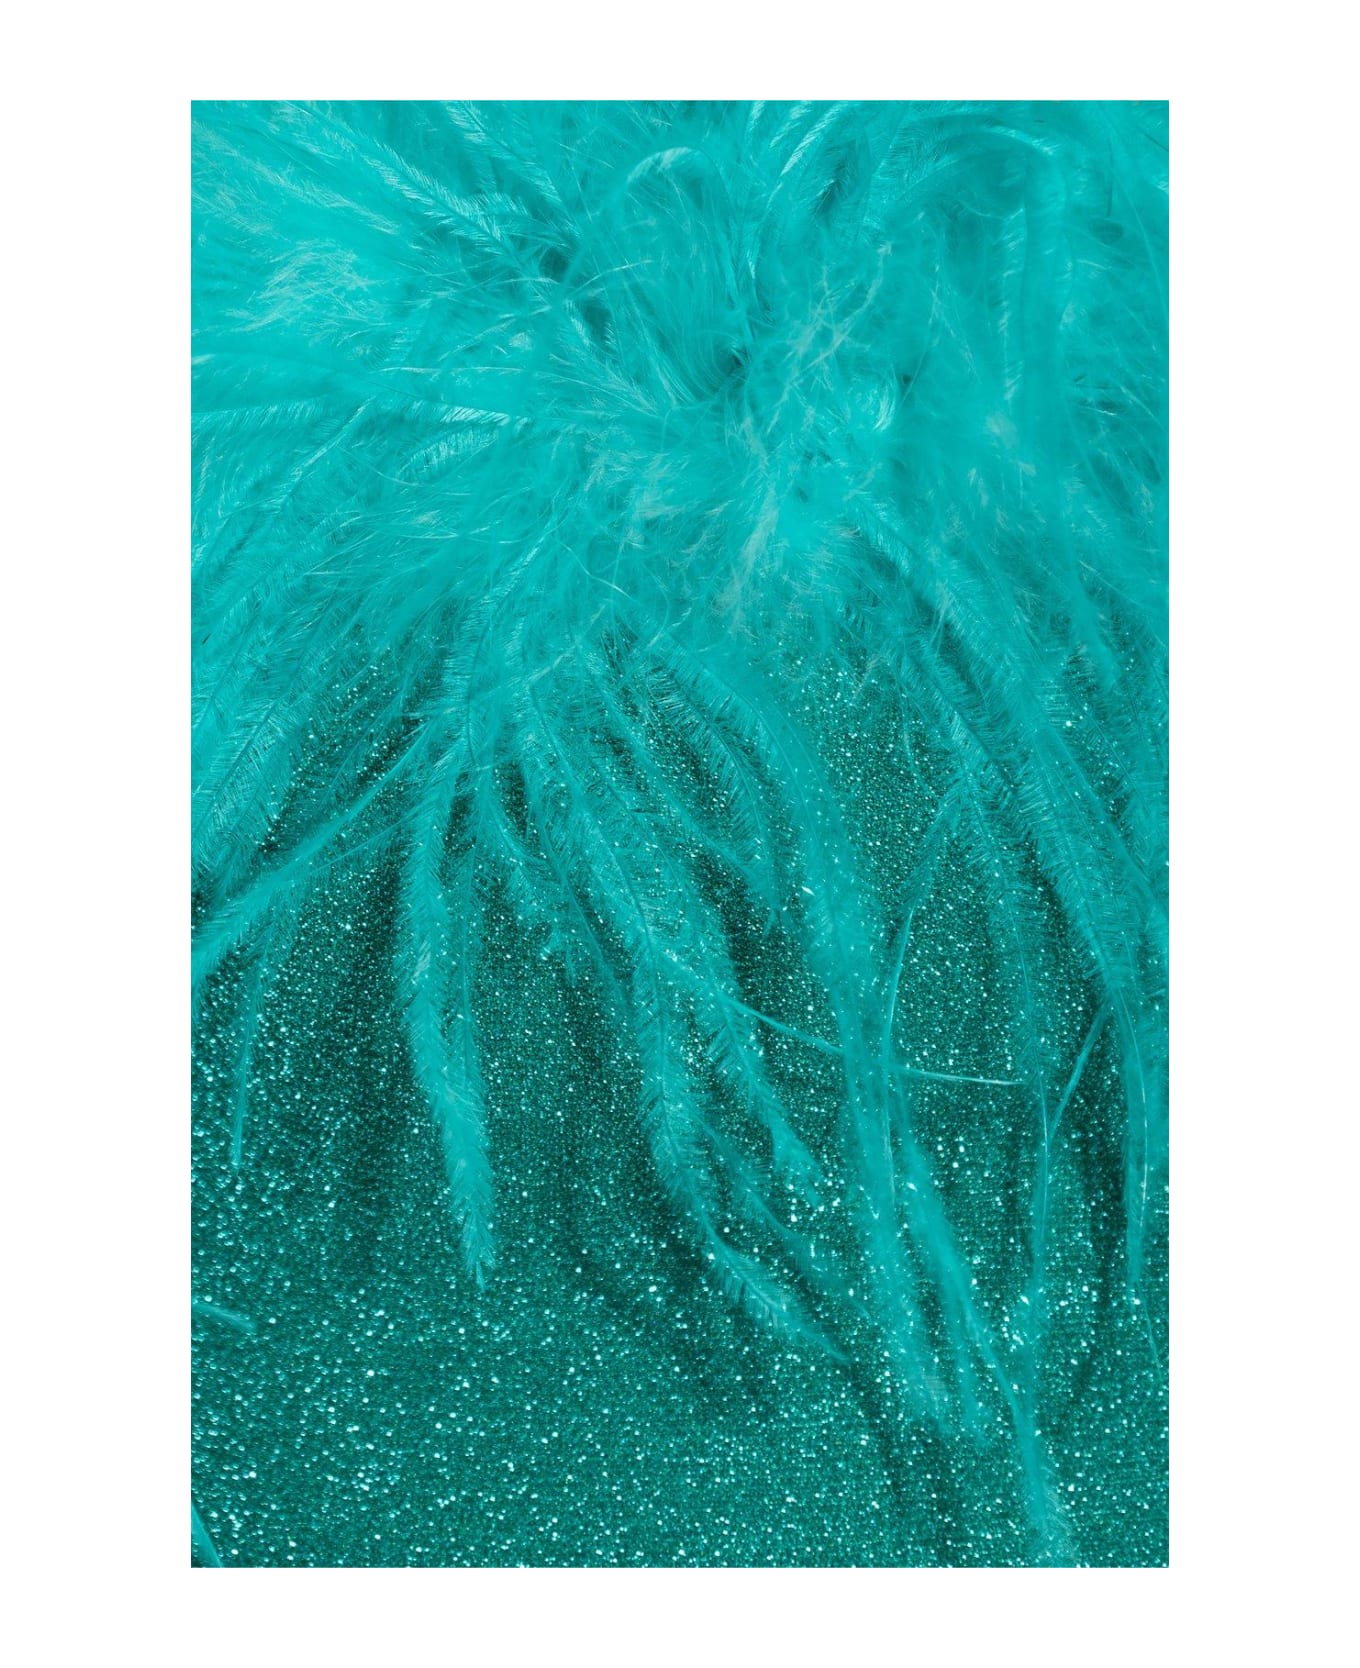 Oseree Glitter Feather Trimmed Crop Top - Aquamarine